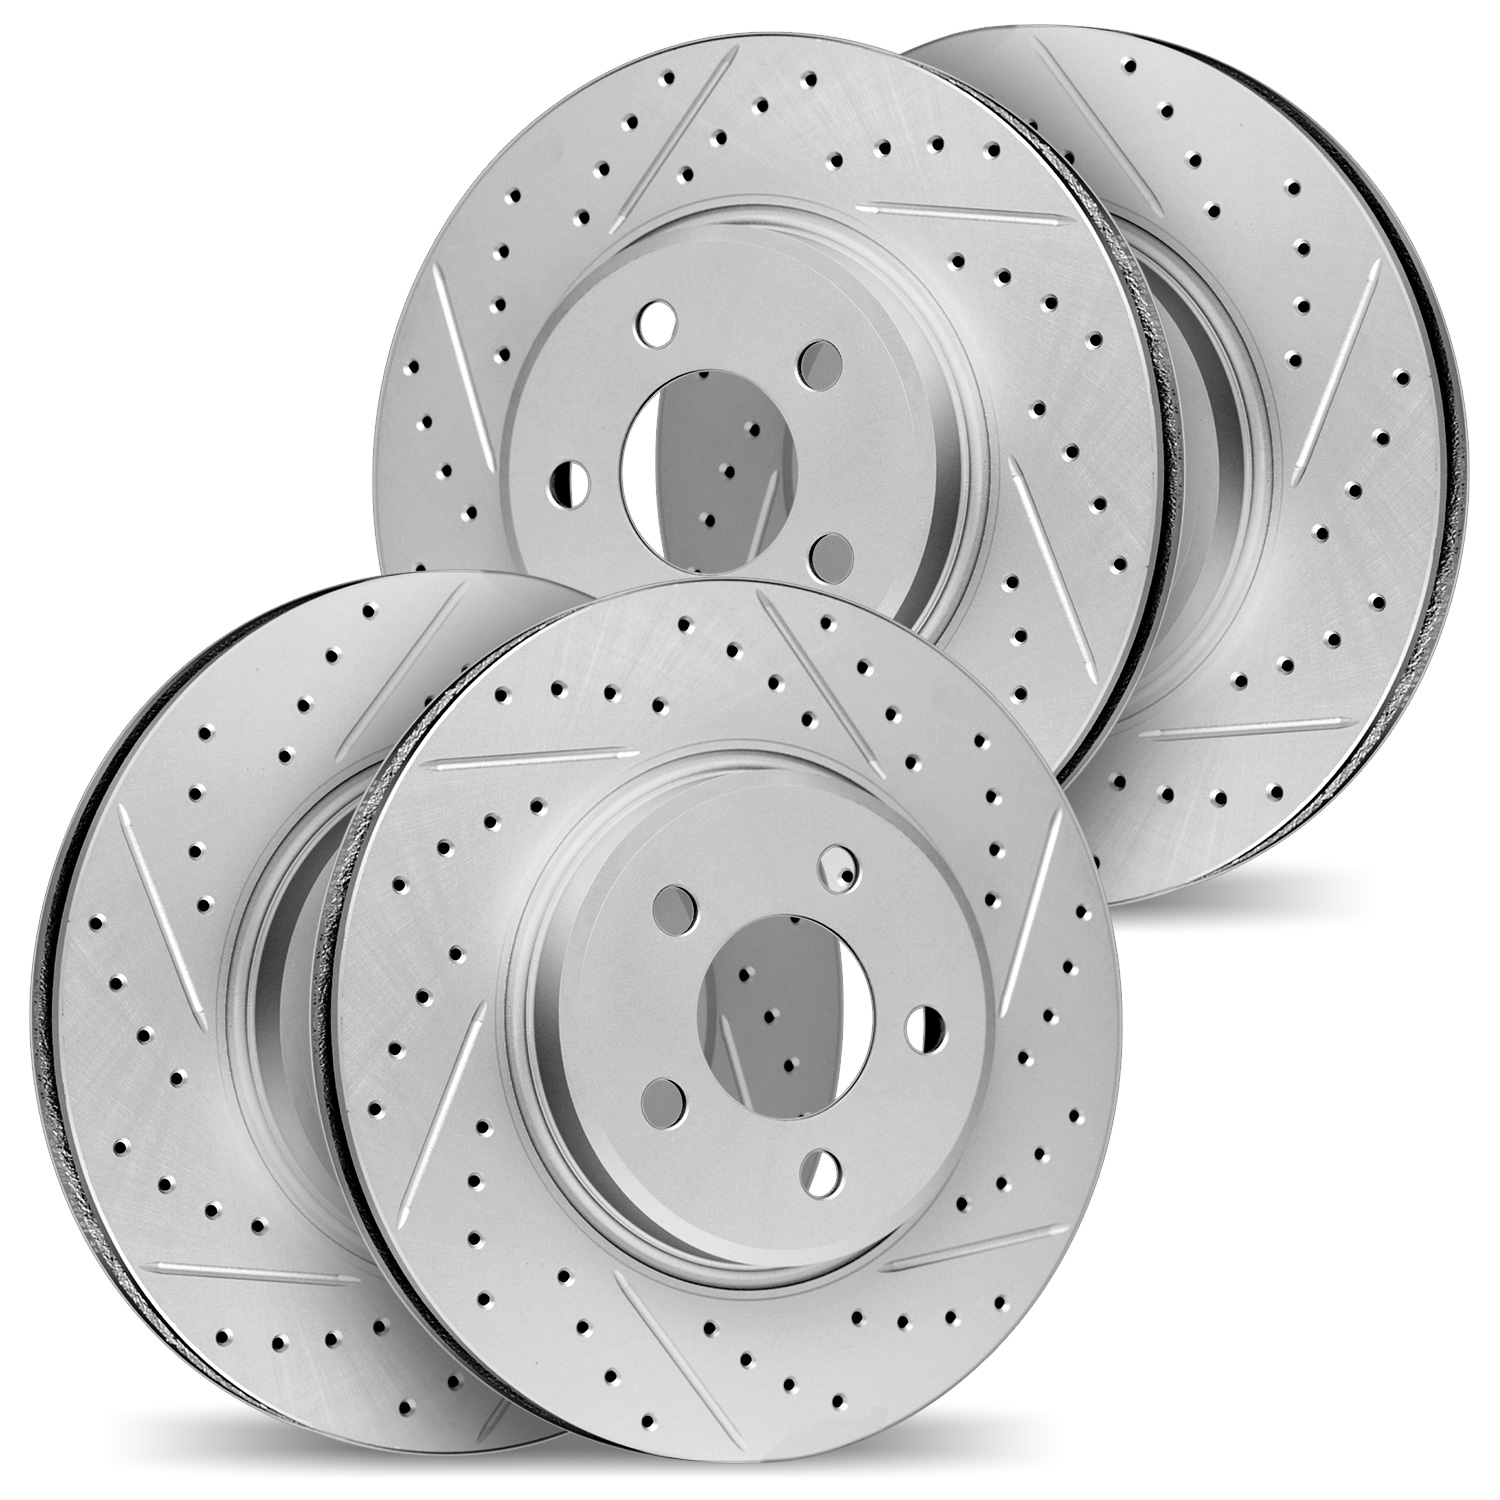 2004-65010 Geoperformance Drilled/Slotted Brake Rotors, 2002-2010 GM, Position: Front and Rear